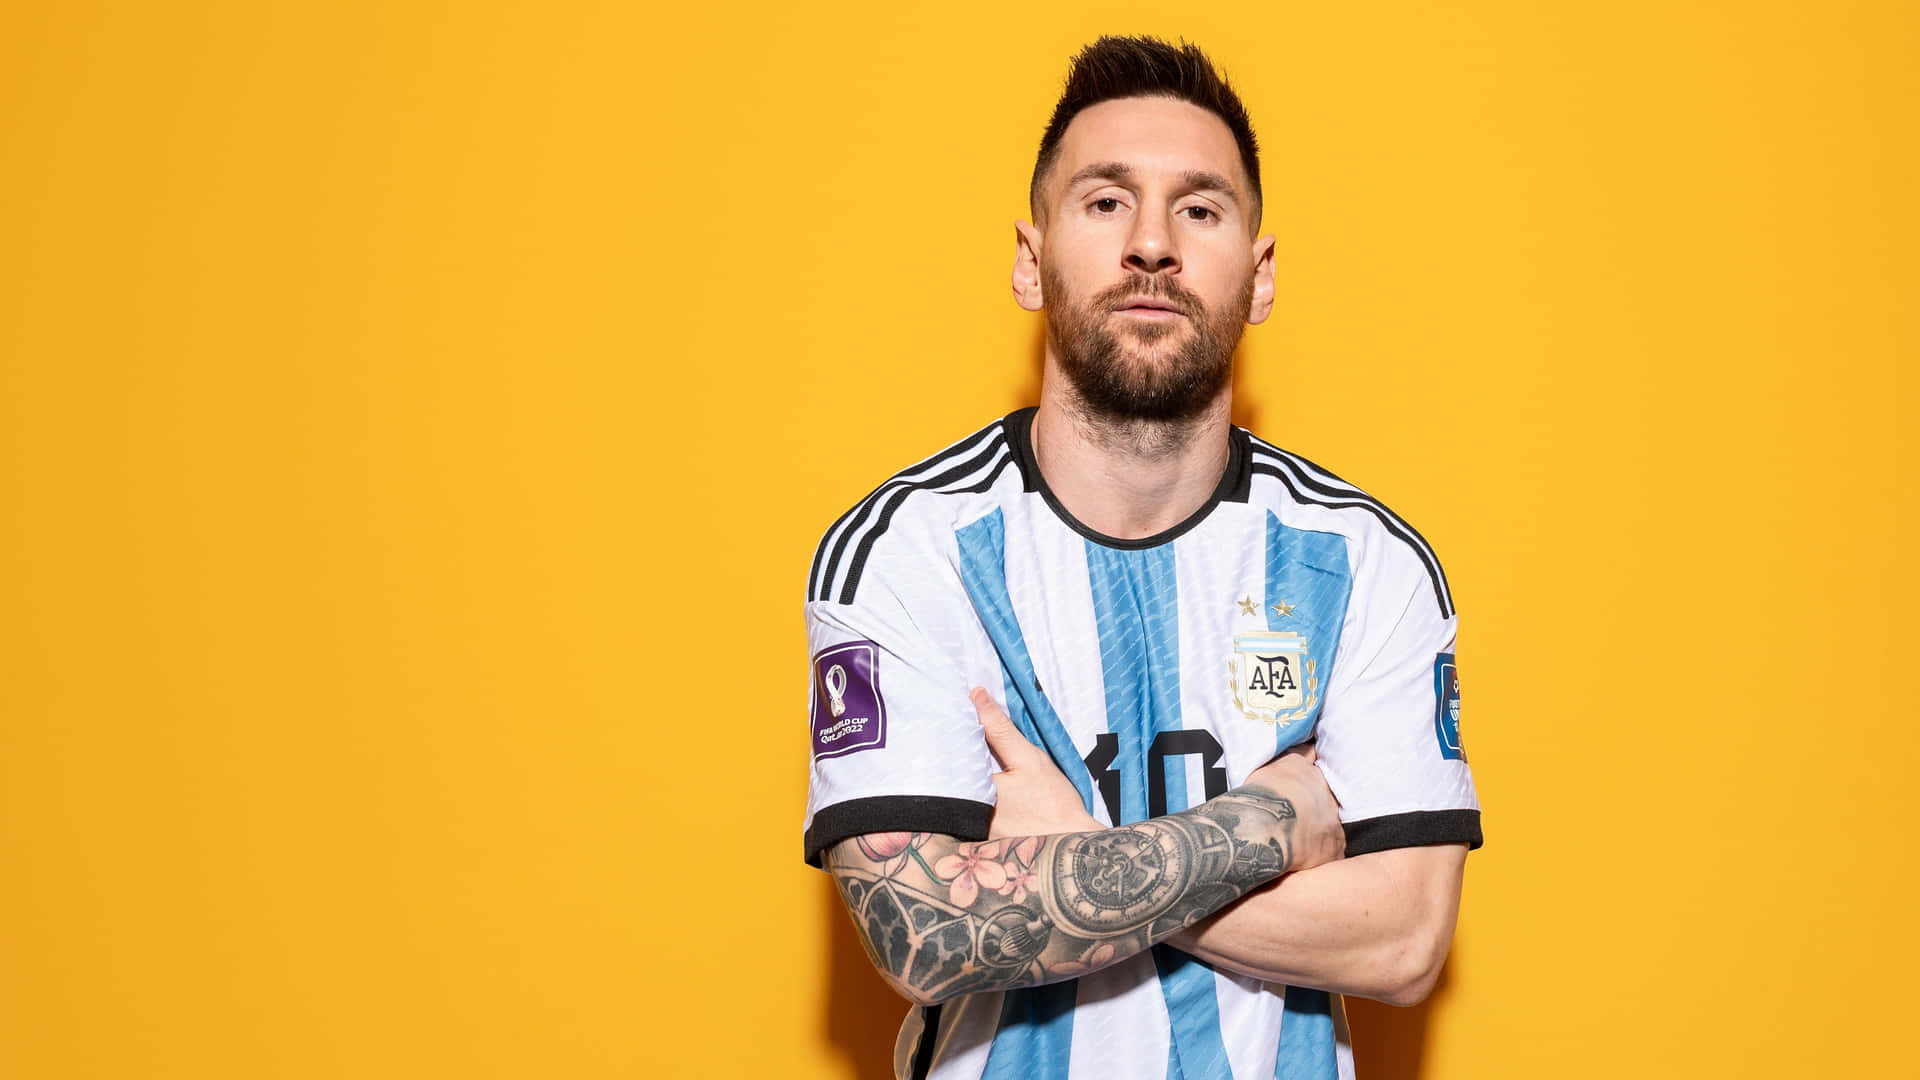 Lionel Messi Argentina Jersey Yellow Background Wallpaper